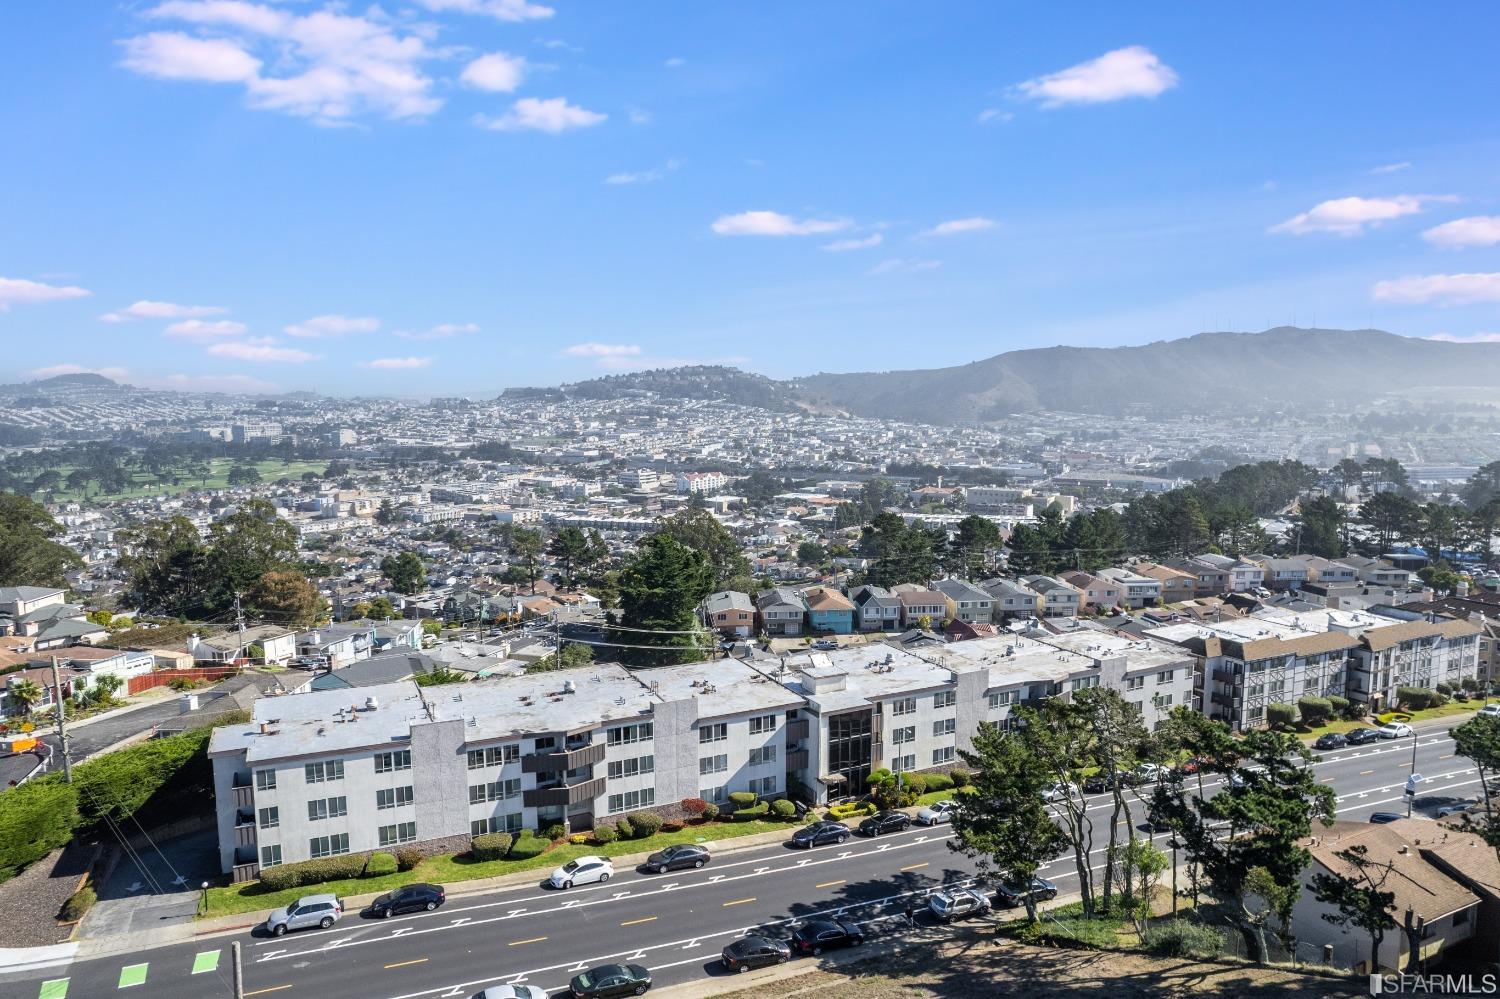 13-facts-about-innovations-and-technological-advances-in-daly-city-california